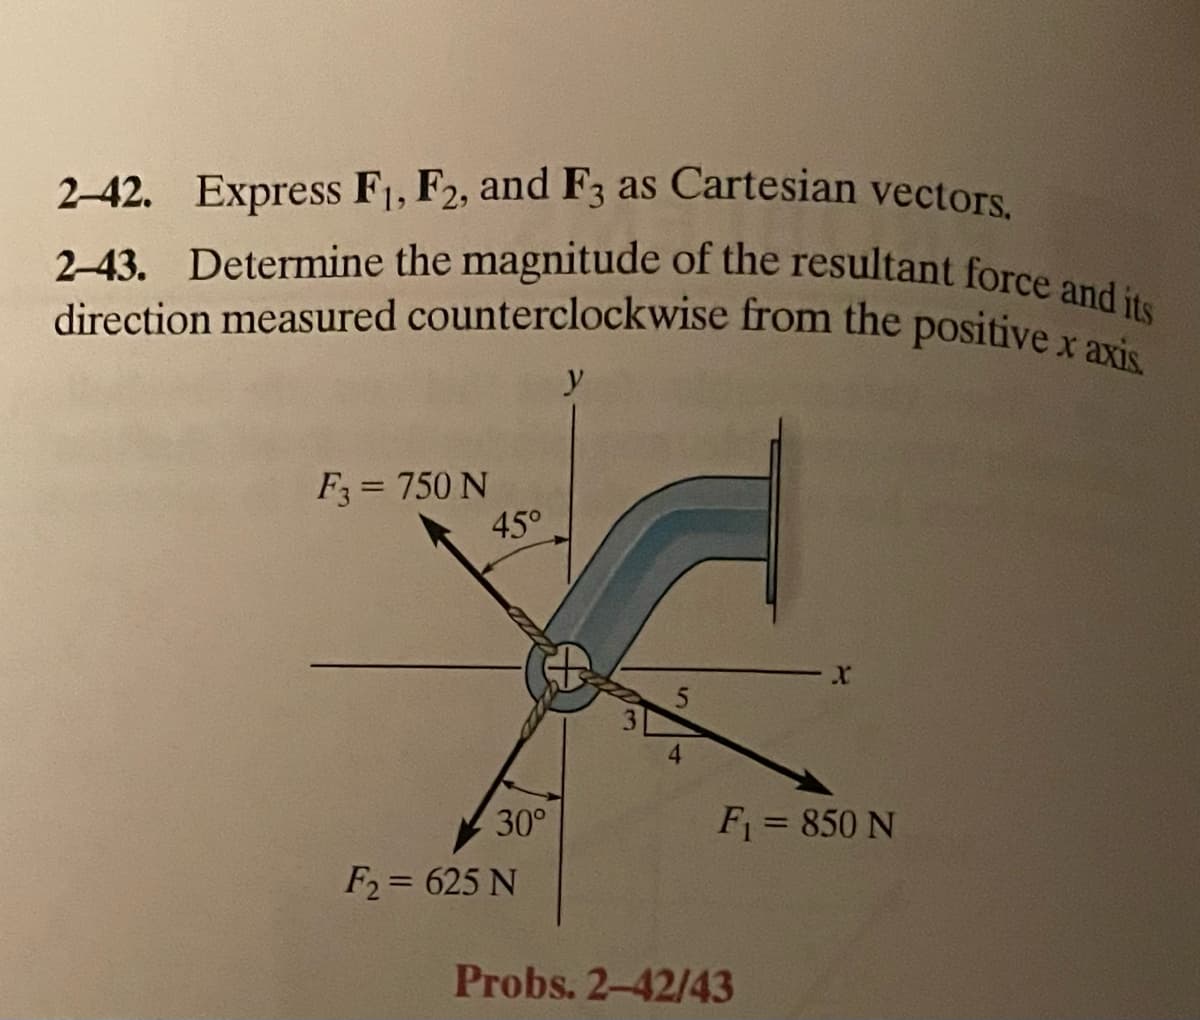 2-42. Express F1, F2, and F3 as Cartesian vectors.
2-43. Determine the magnitude of the resultant force and its
direction measured counterclockwise from the positive x axis.
F3 = 750 N
45°
30°
F2= 625 N
y
4
X
F₁ = 850 N
Probs. 2-42/43